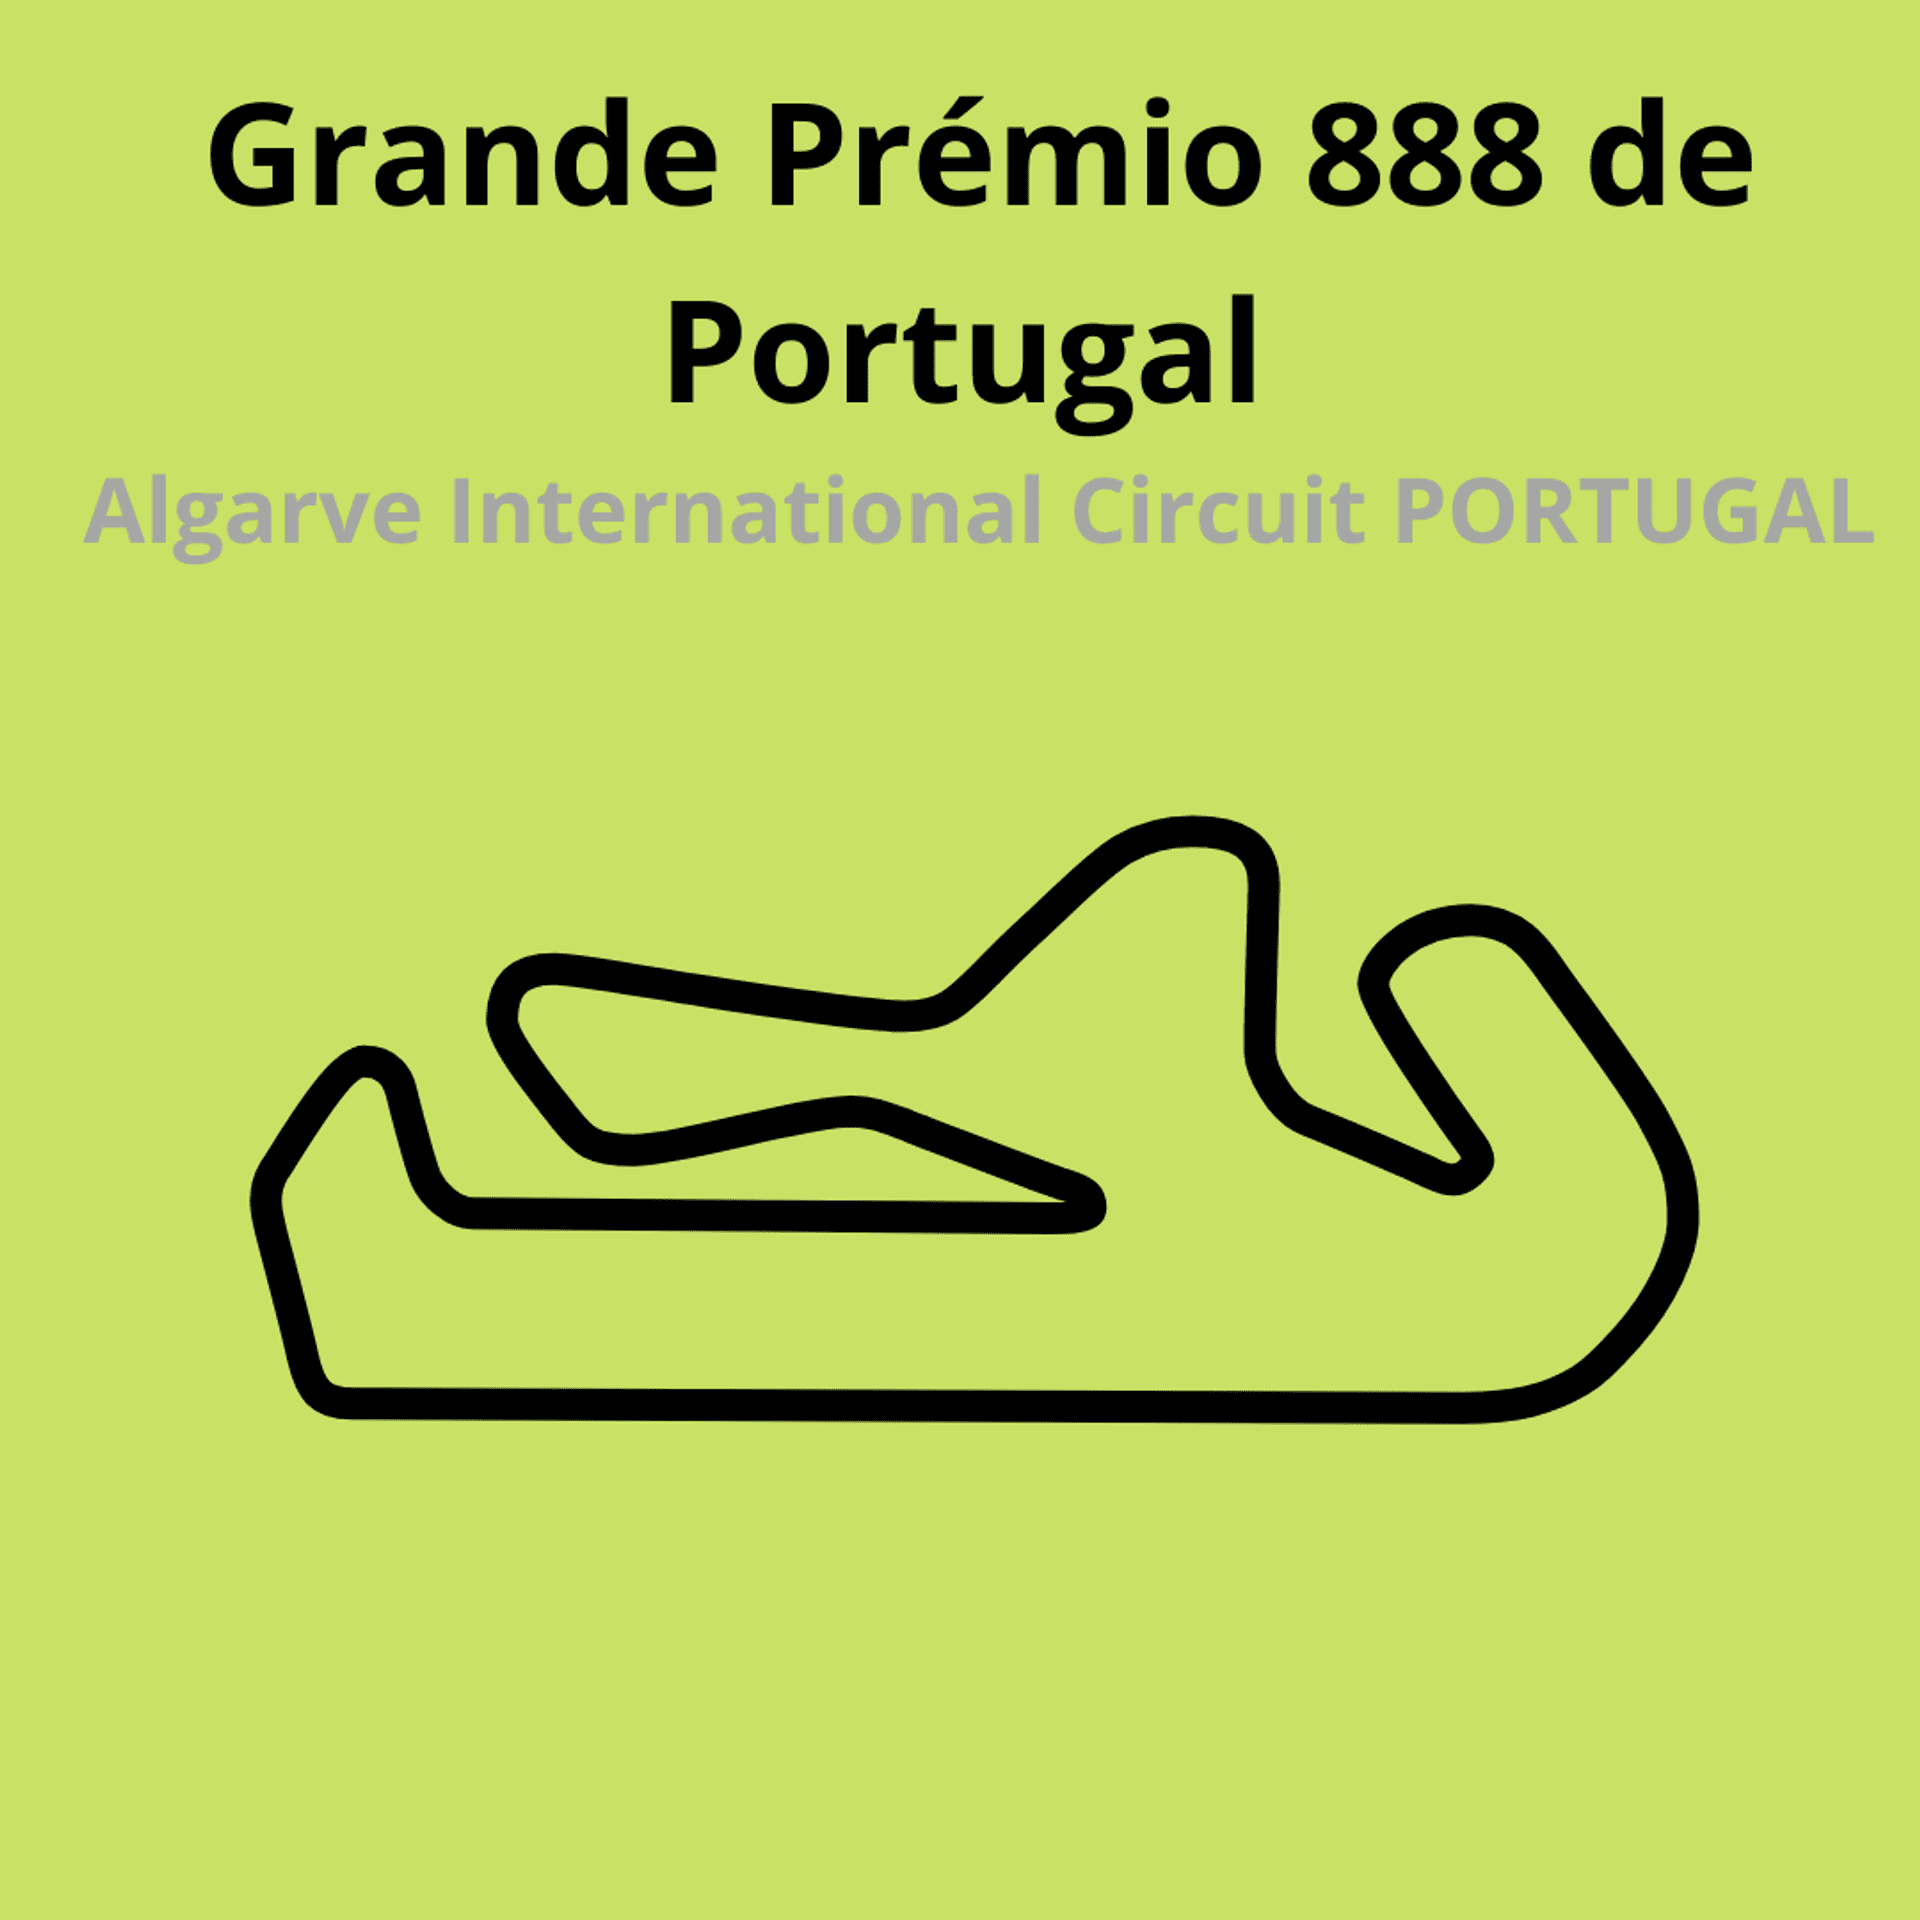 Gran Premio 888 de Portugal. Discover all the races of the moto world championship 2021. the characteristics of every circuit, the records and difficulties.